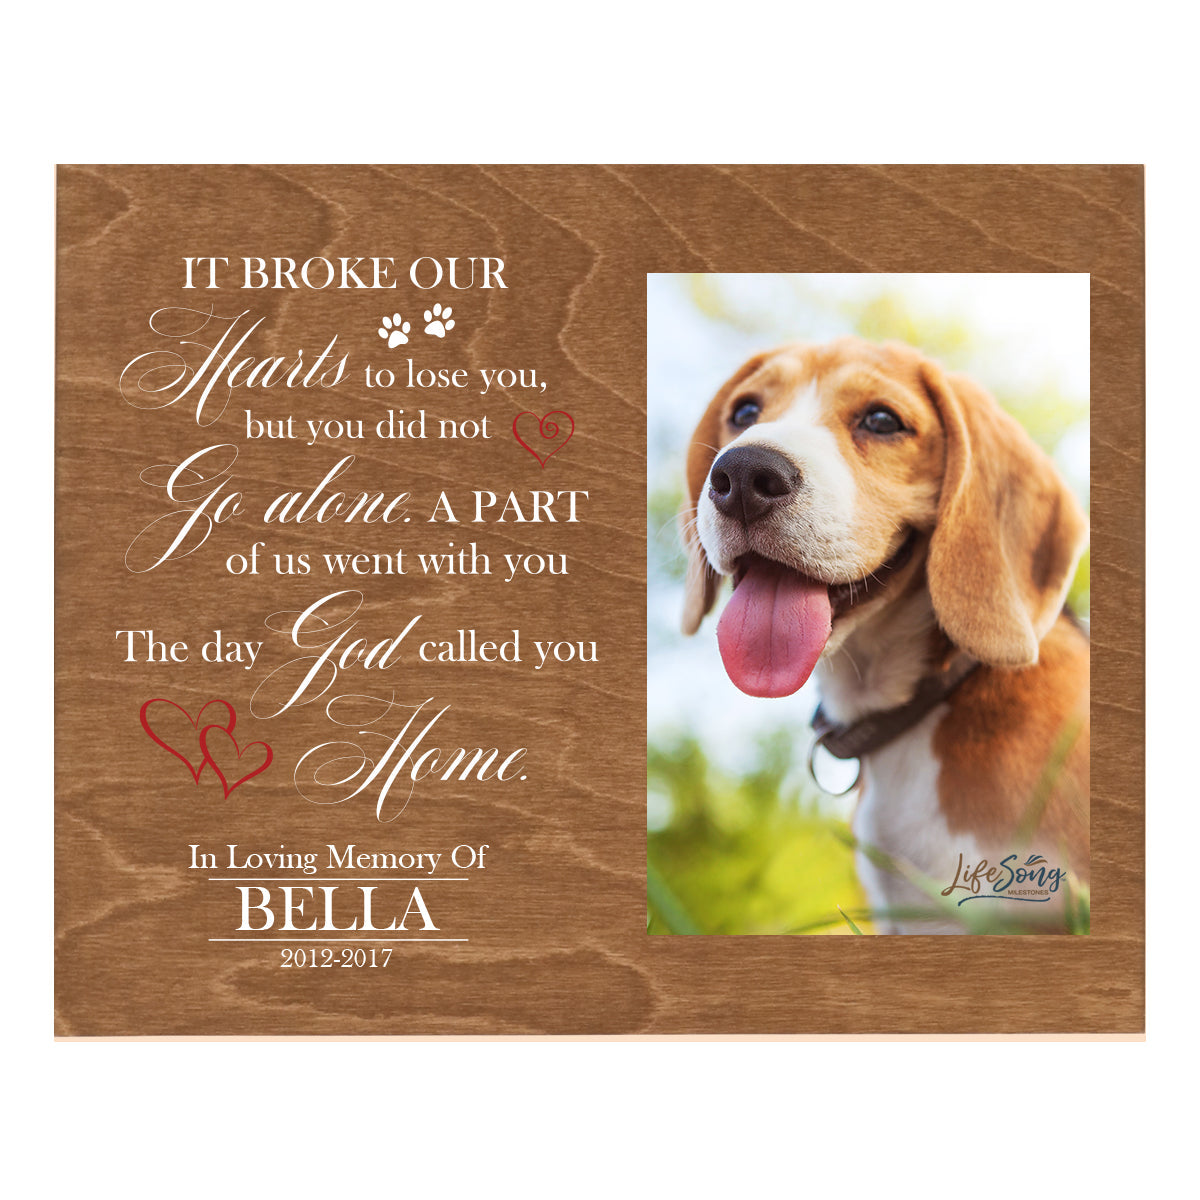 Pet Memorial Photo Wall Plaque Décor - It Broke Our Hearts To Lose You